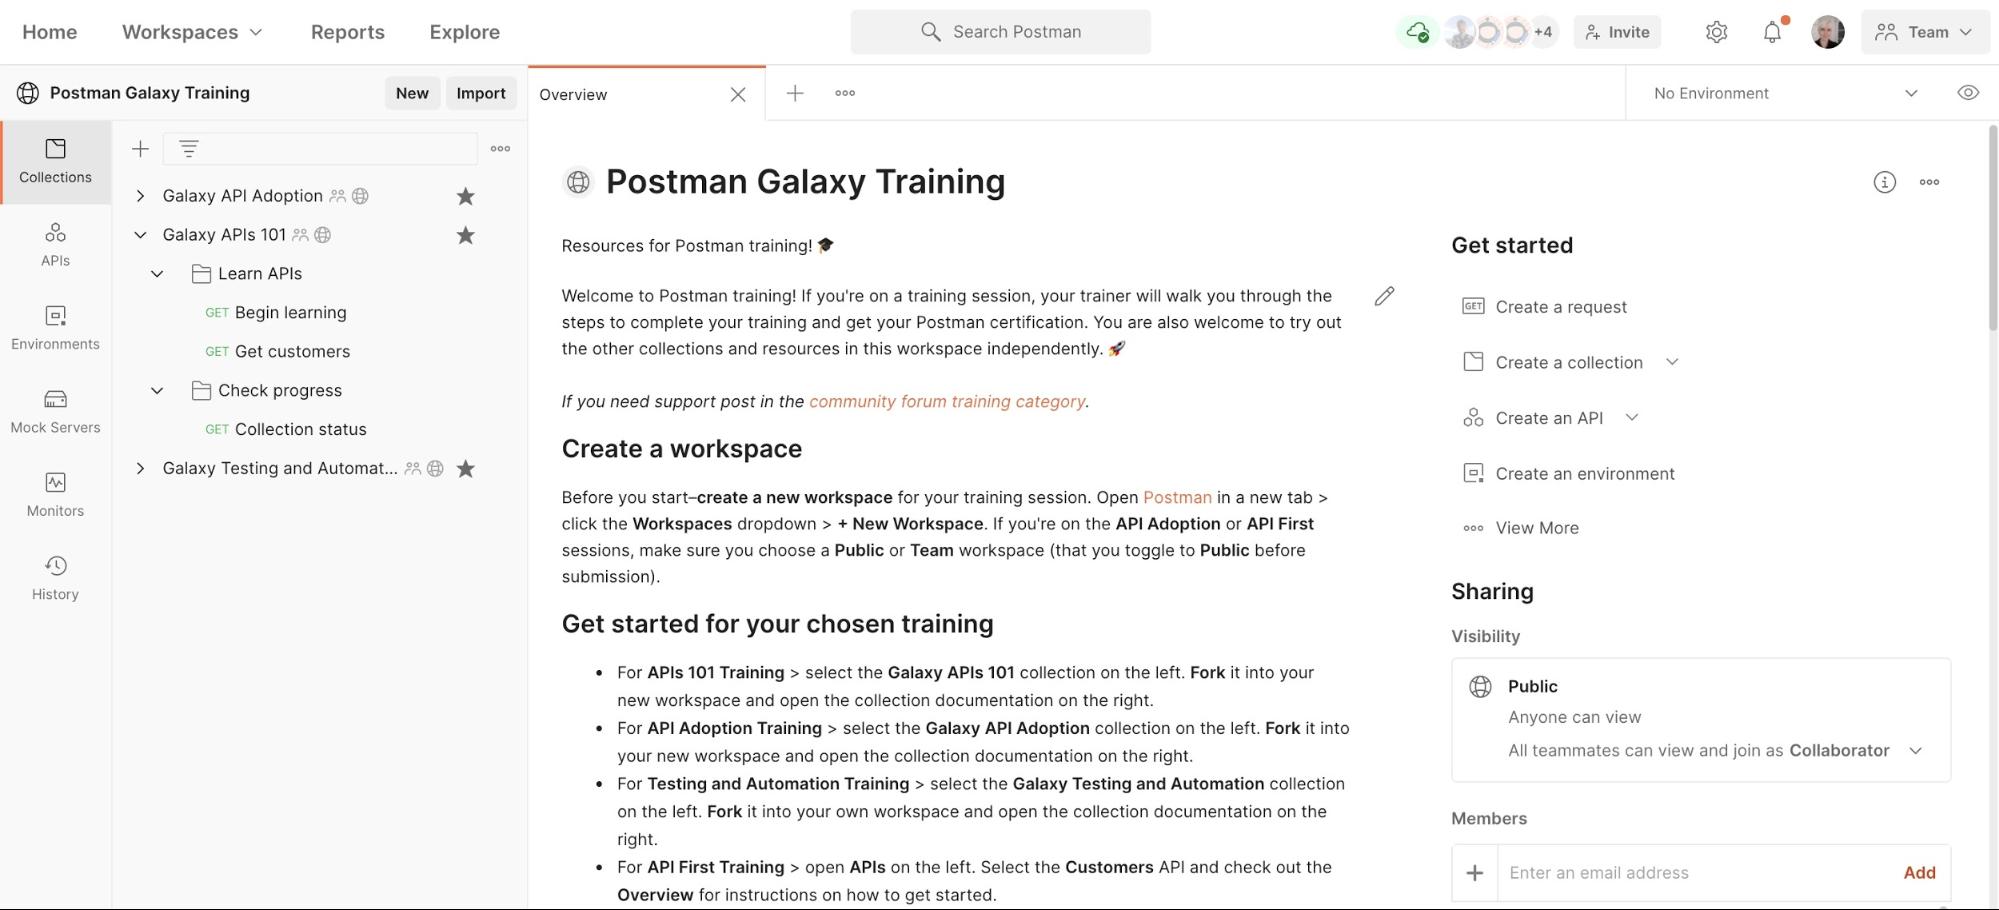 Postman training workspace built for the Postman Galaxy conference